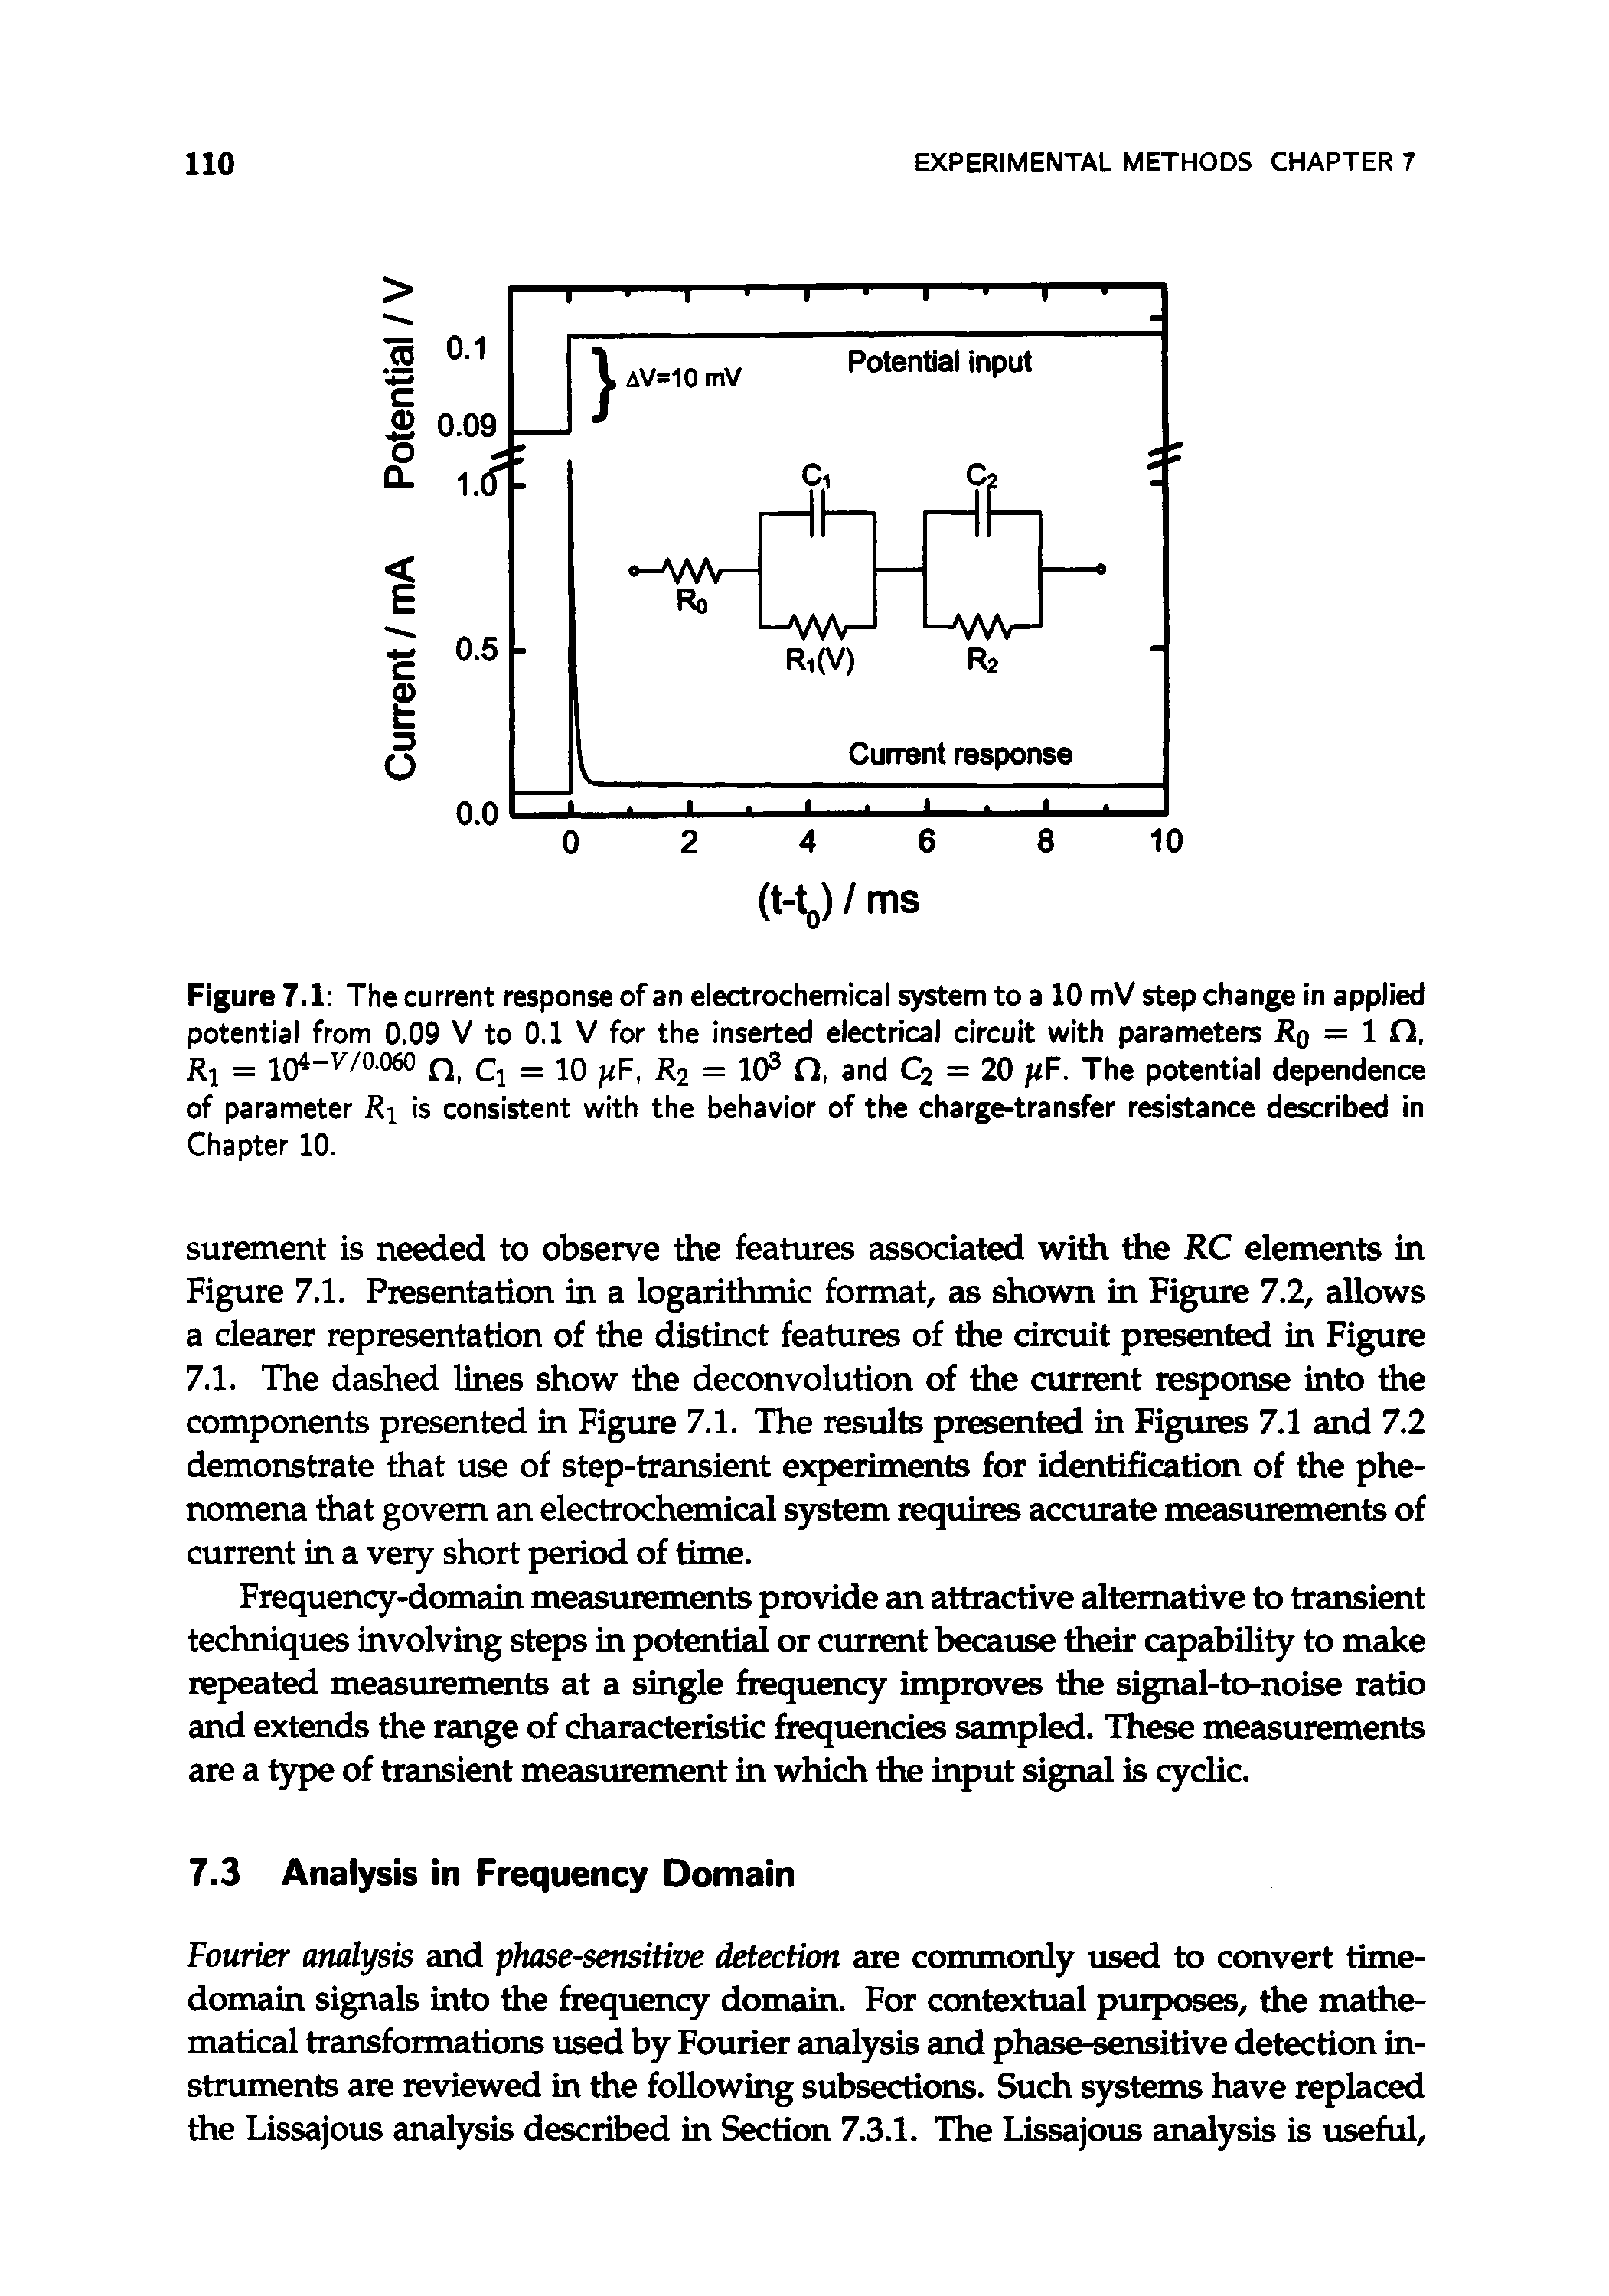 Figure 7.1 The current response of an electrochemical system to a 10 mV step change in applied potential from 0.09 V to 0.1 V for the inserted electrical circuit with parameters l o == 1 R = 10 - /0060 n, Cl = 10 F, 1 2 = 10 n, and C2 = 20 if. The potential dependence of parameter Ki is consistent with the behavior of the charge-transfer resistance described in Chapter 10.